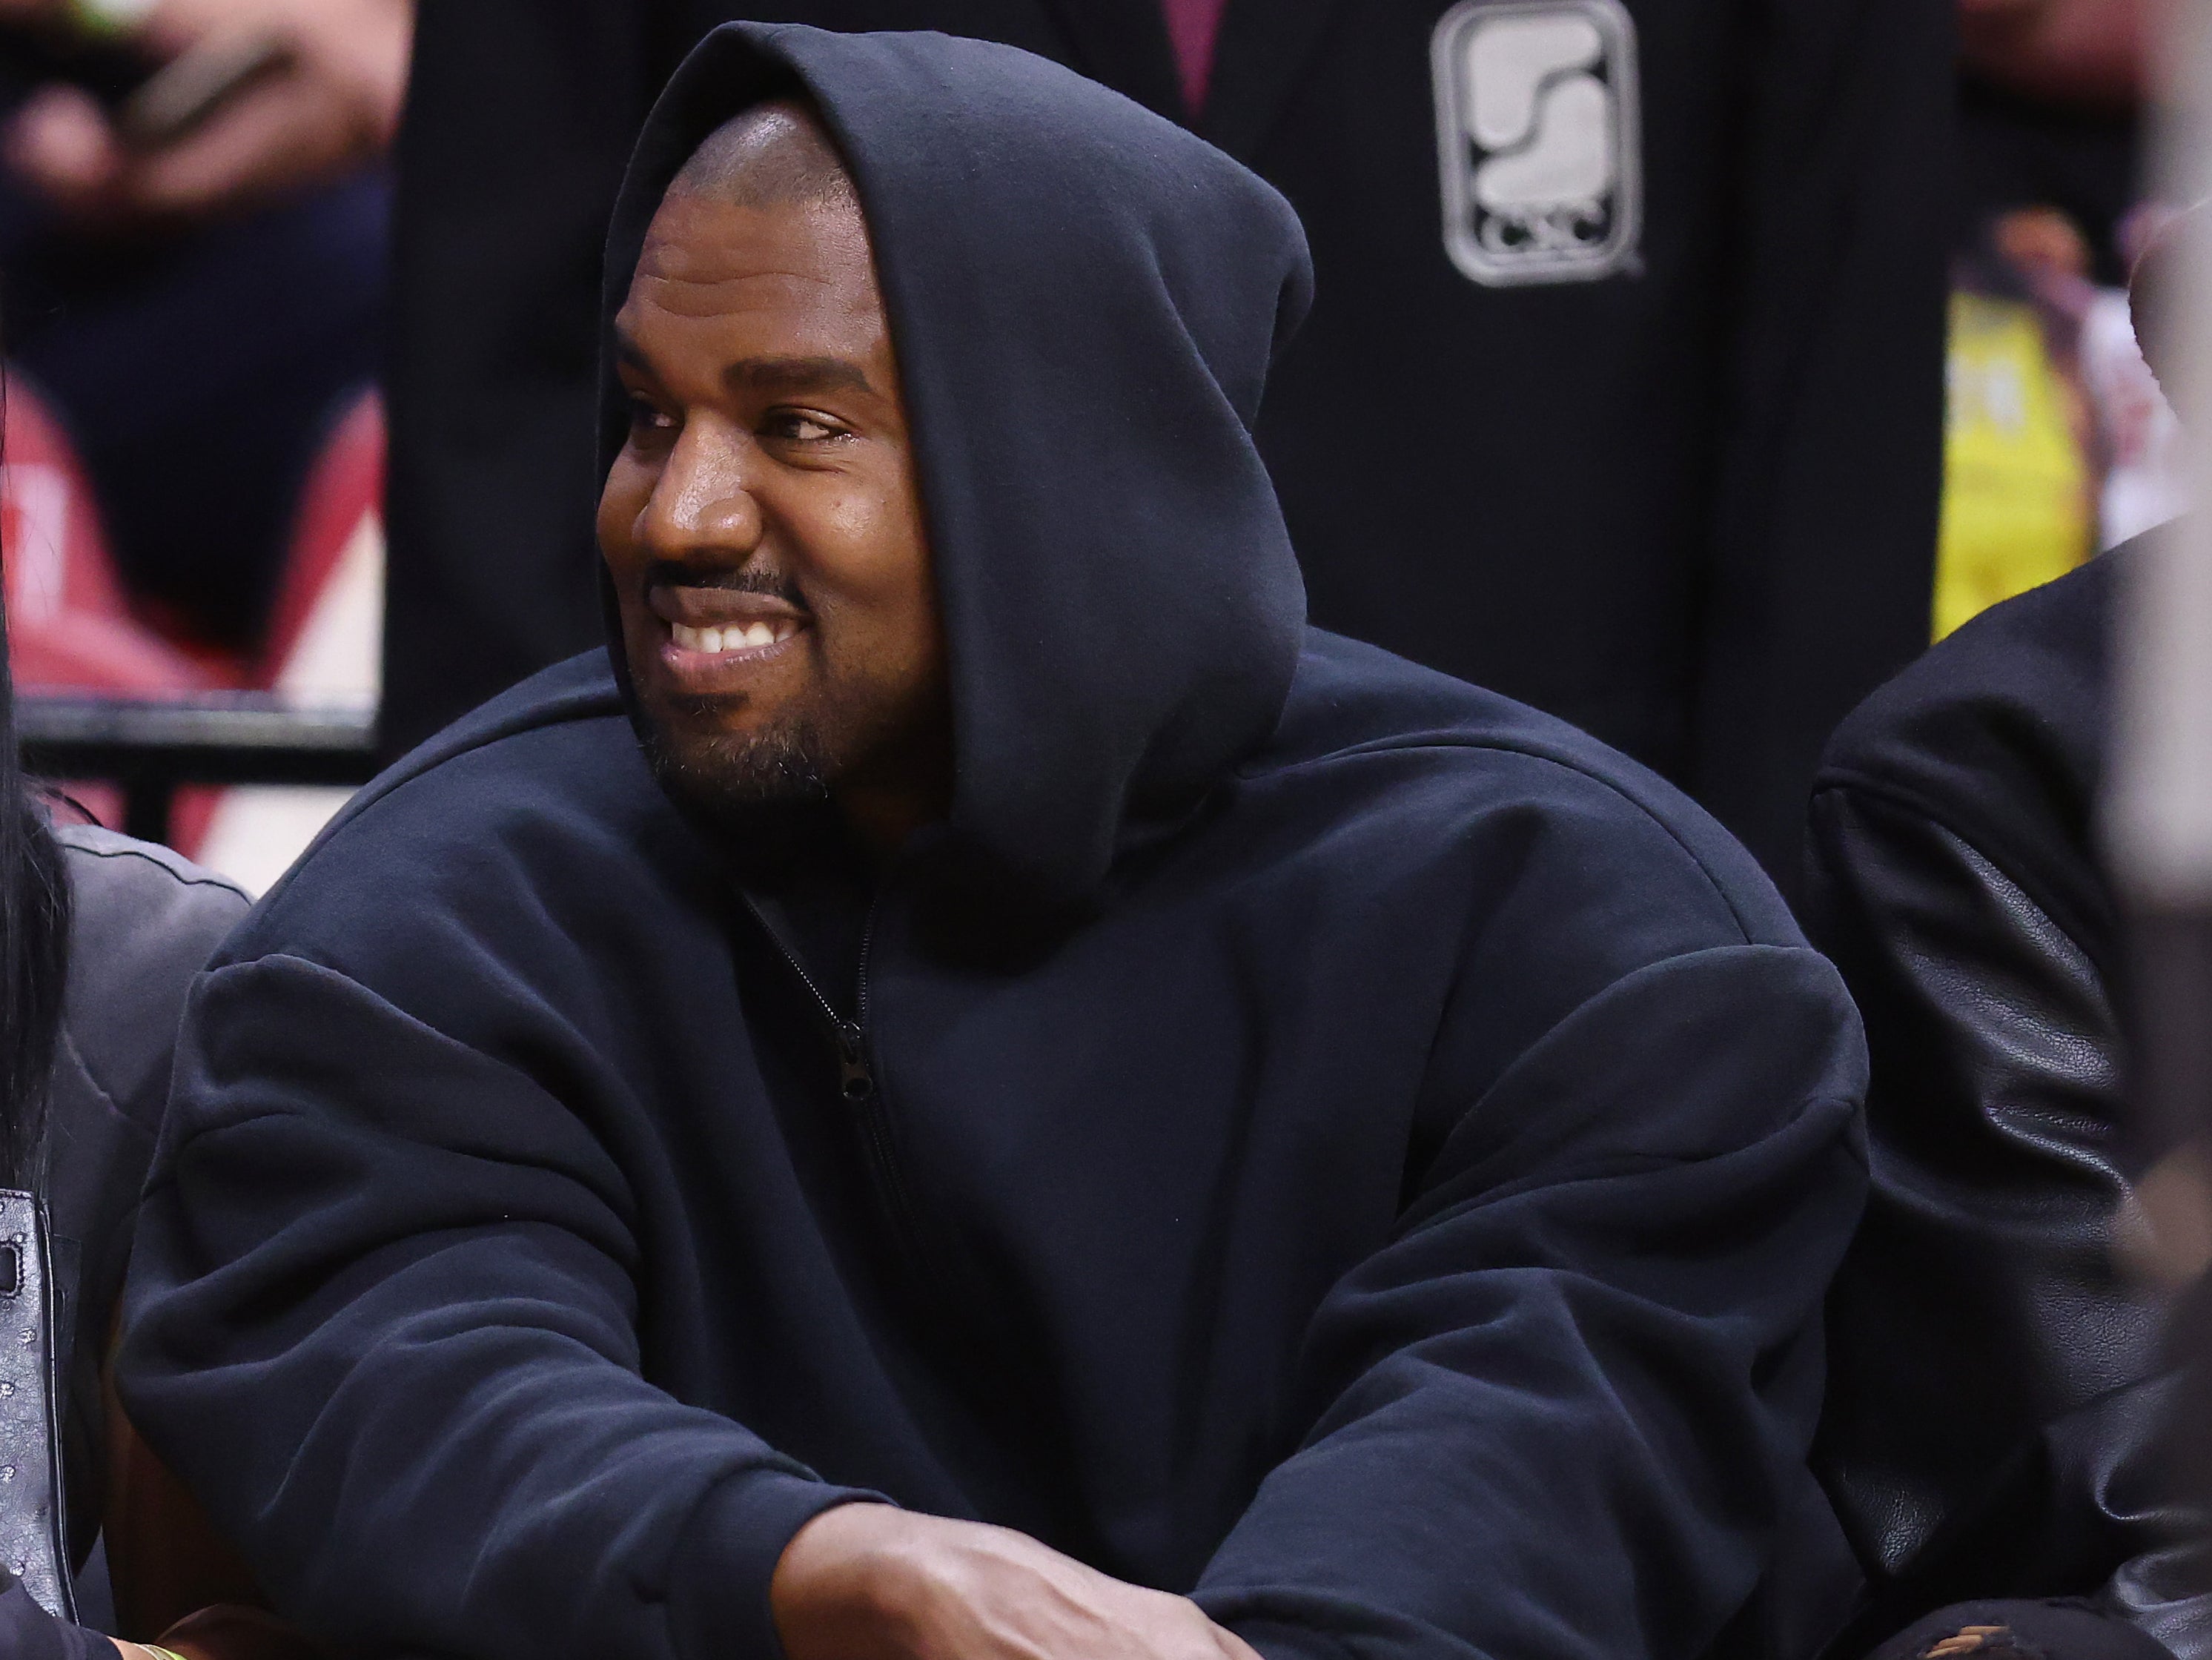 Kanye West has requested Yeezy Gap be displayed in large black bags